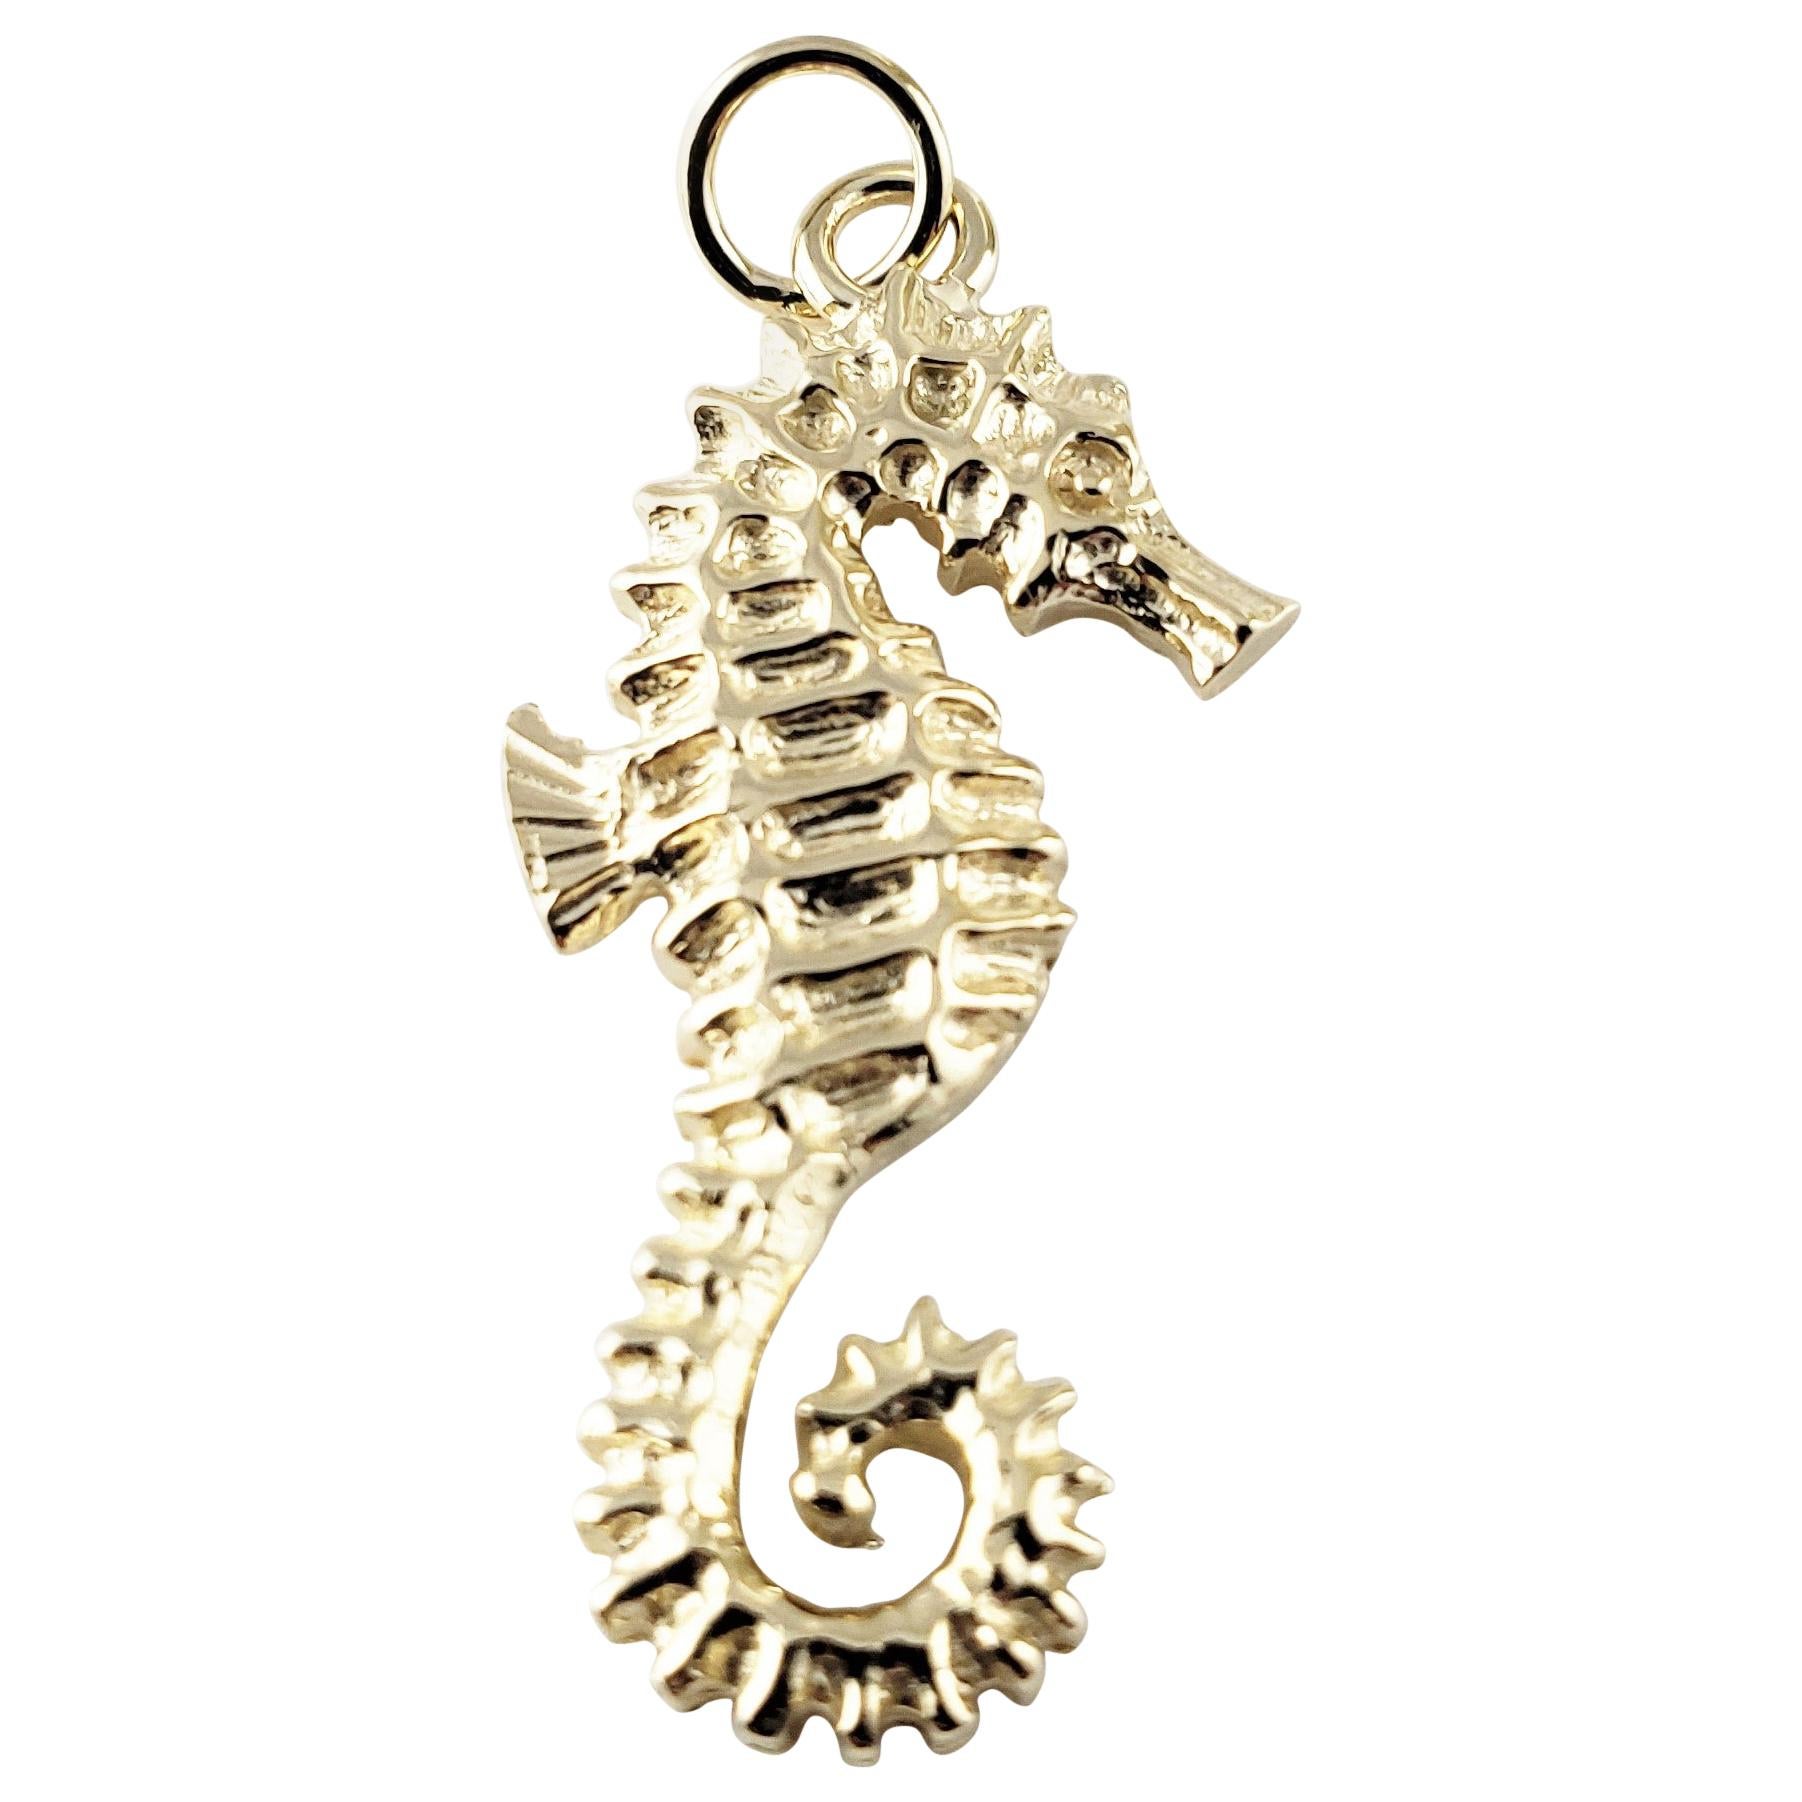 Sterling silver Sea Horse vintage charm # 1824